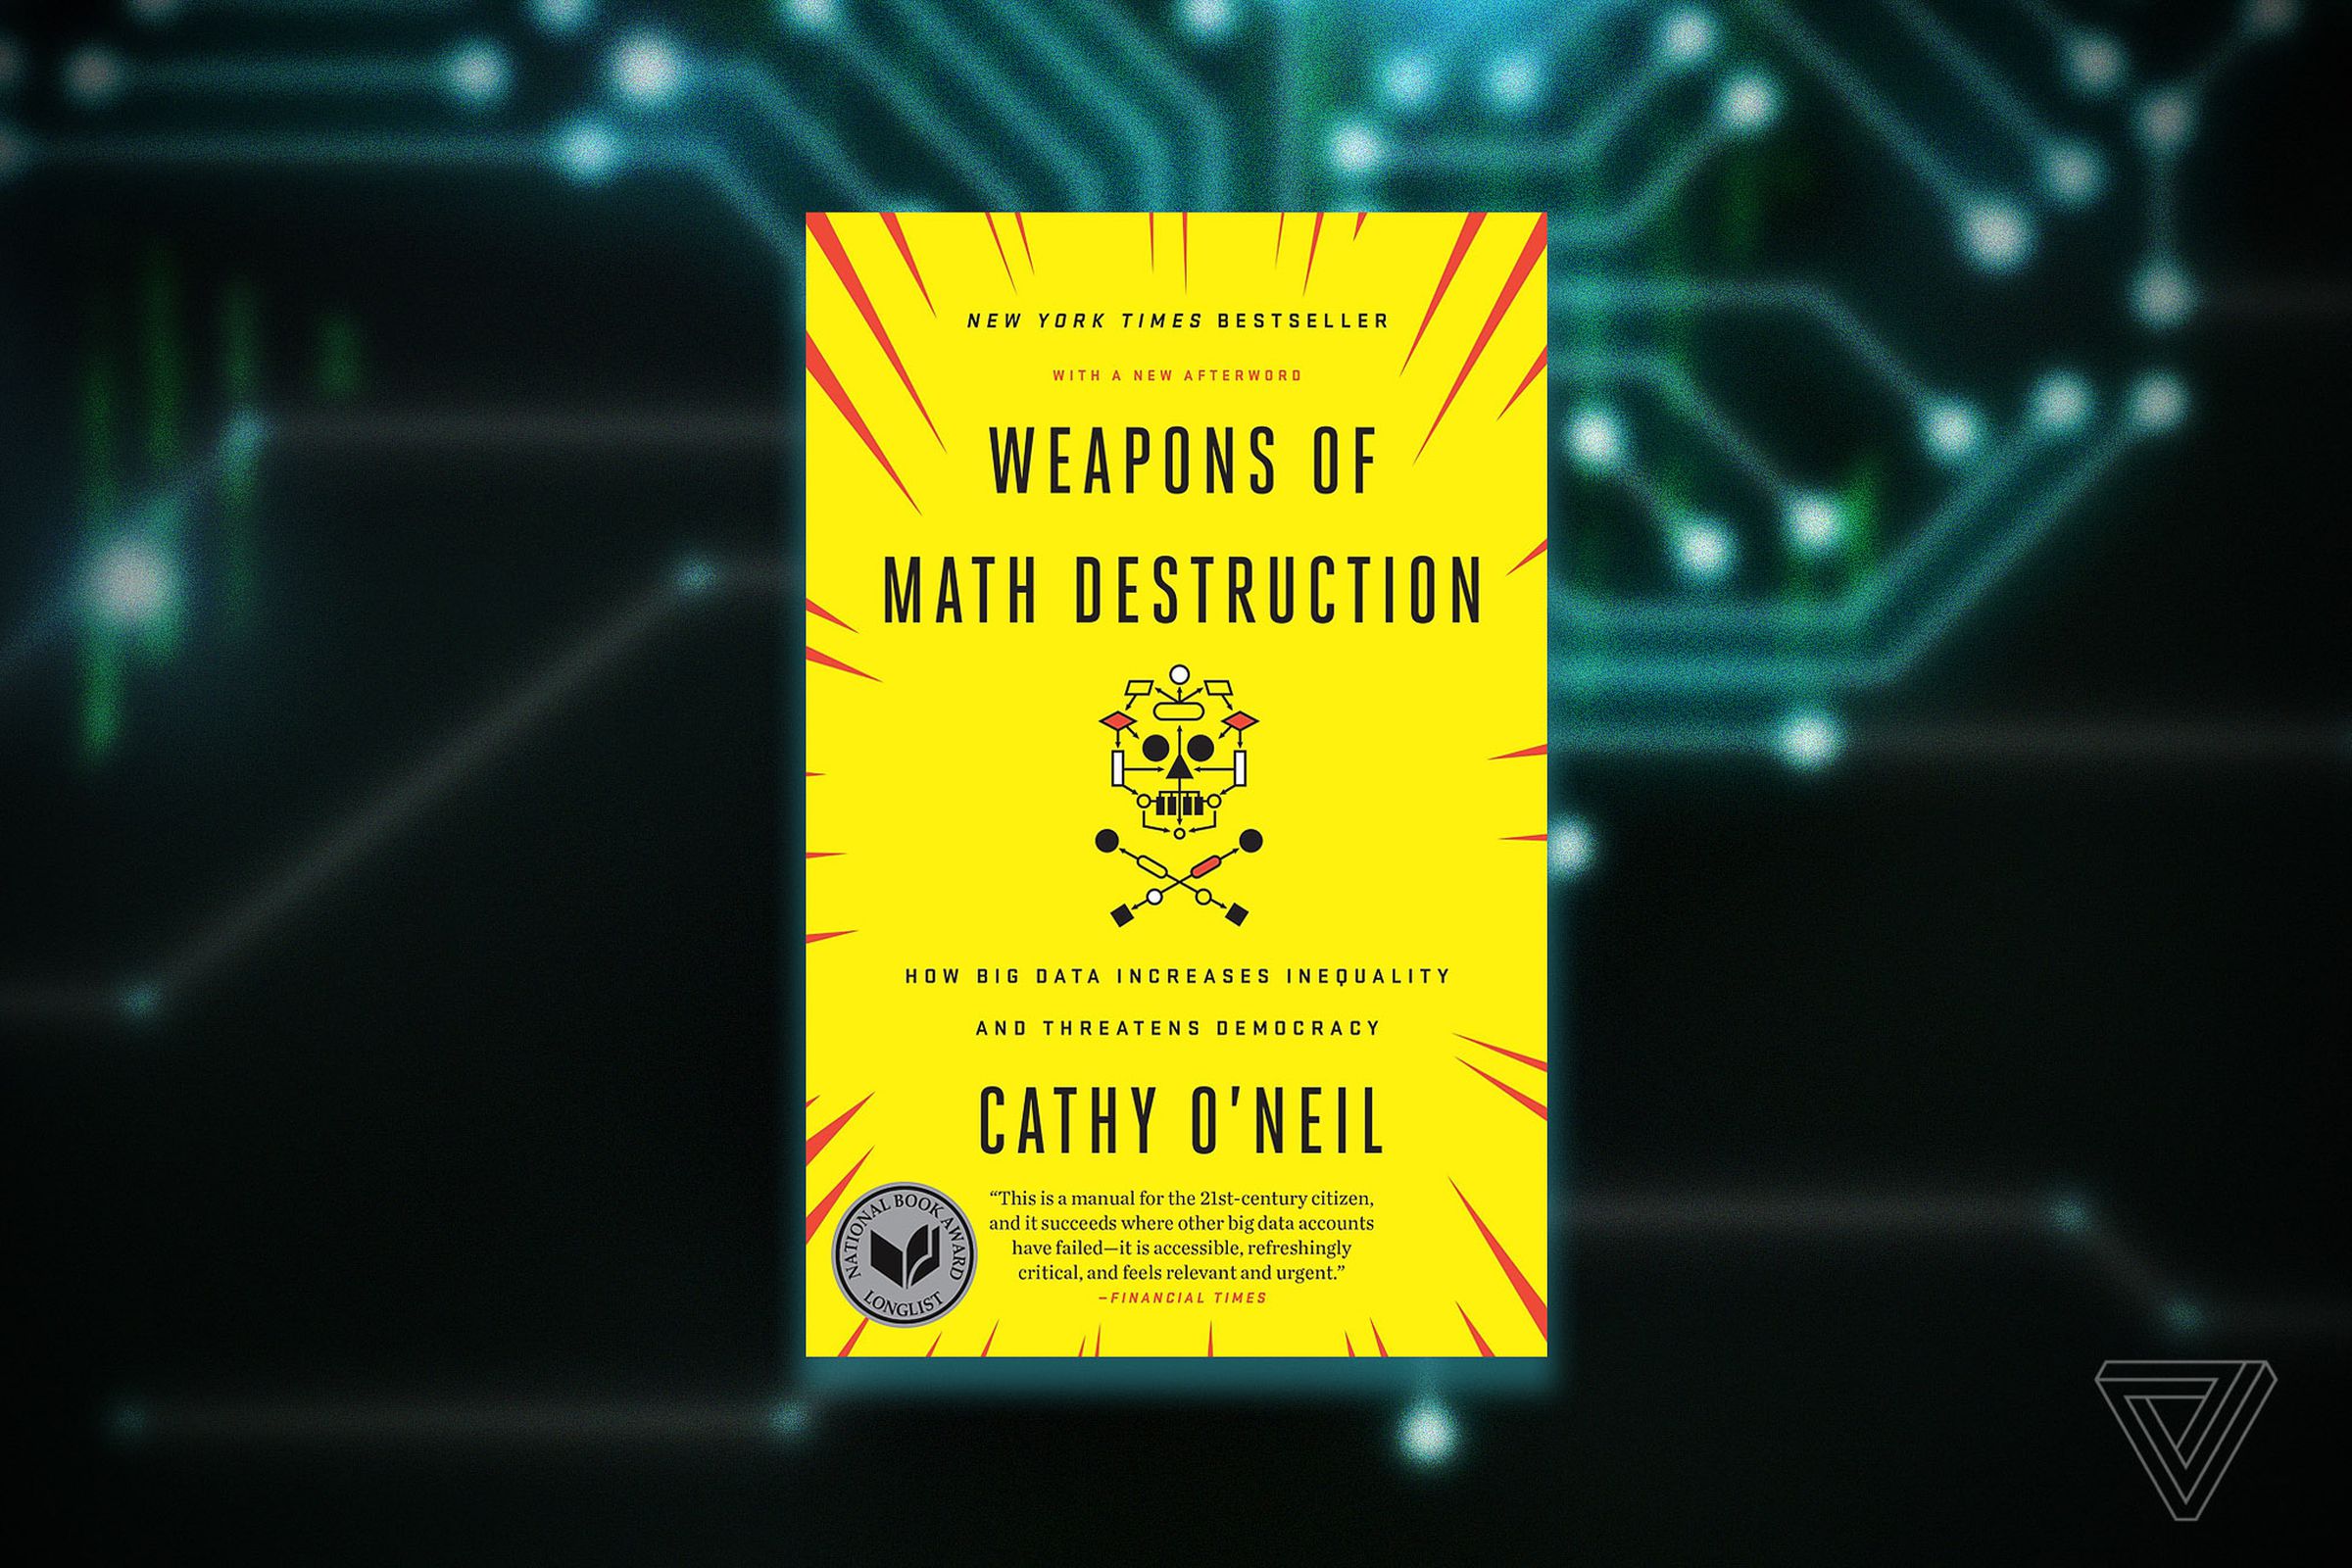 Weapons of Math Destruction, by Cathy O’Neil 